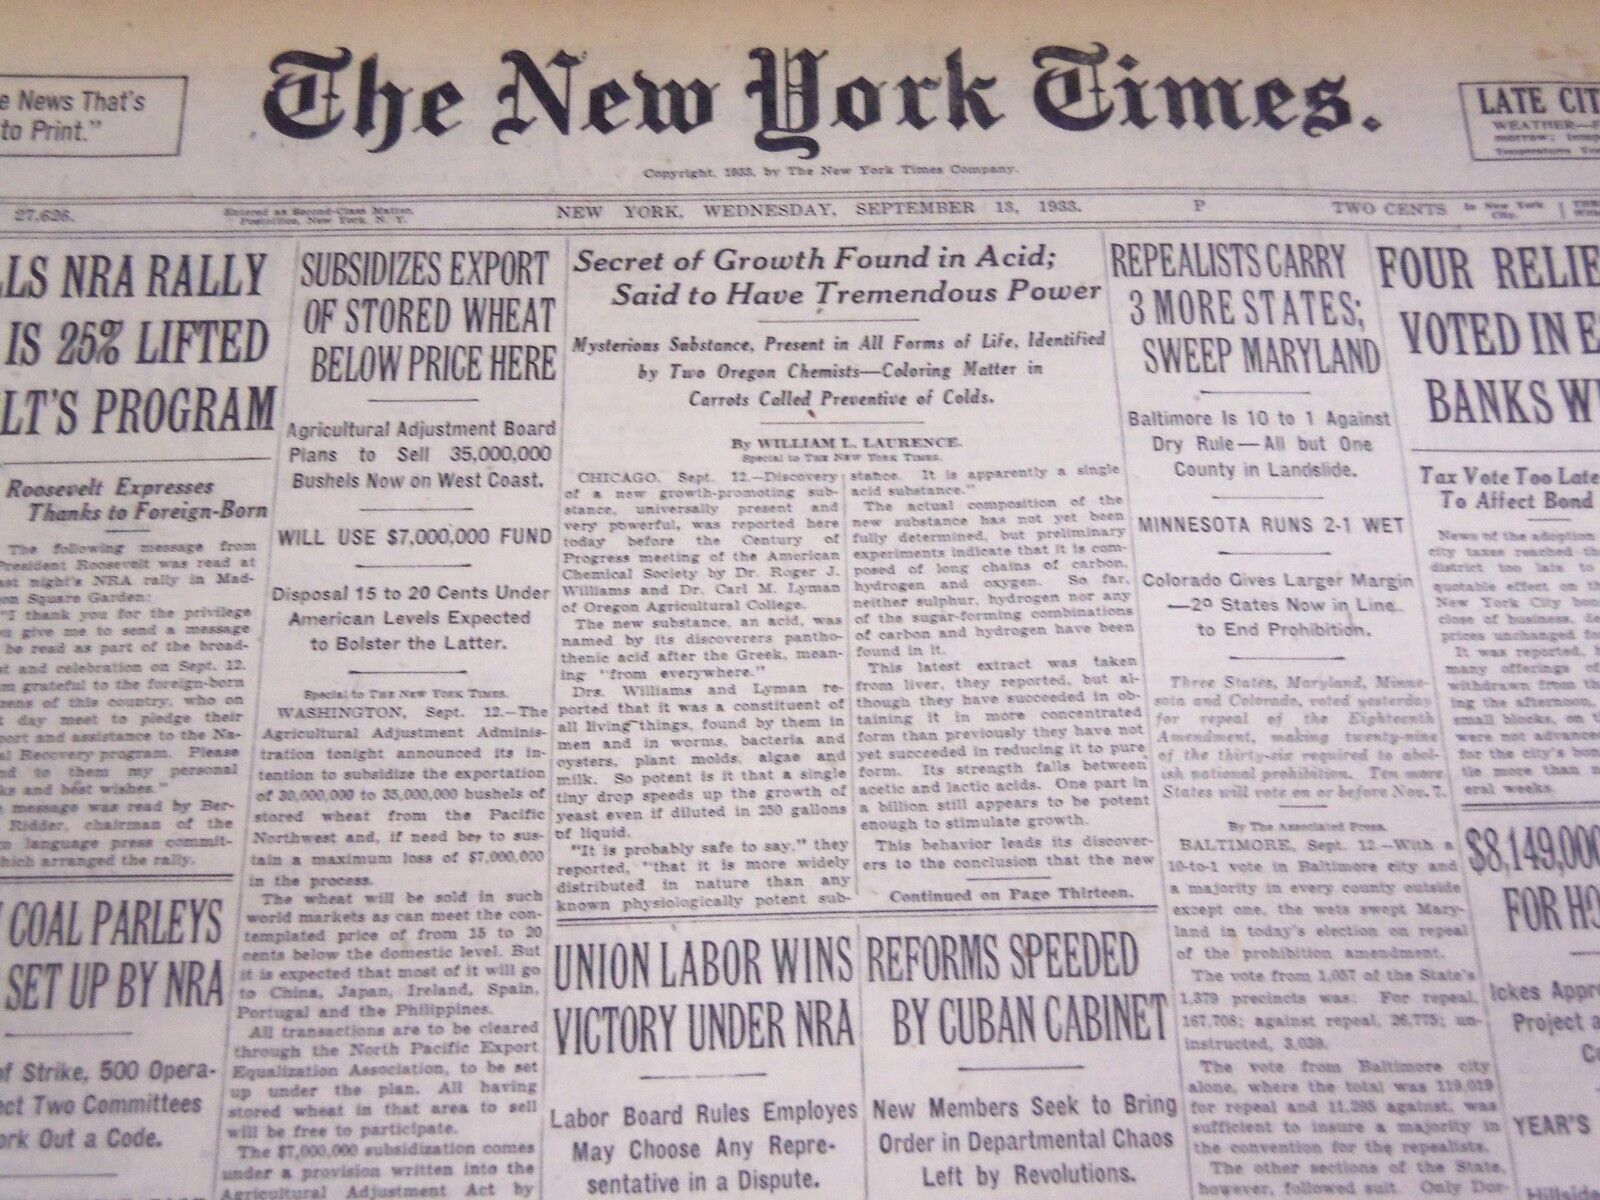 1933 SEPTEMBER 13 NEW YORK TIMES - GROWTH FOUND IN ACID - NT 4172